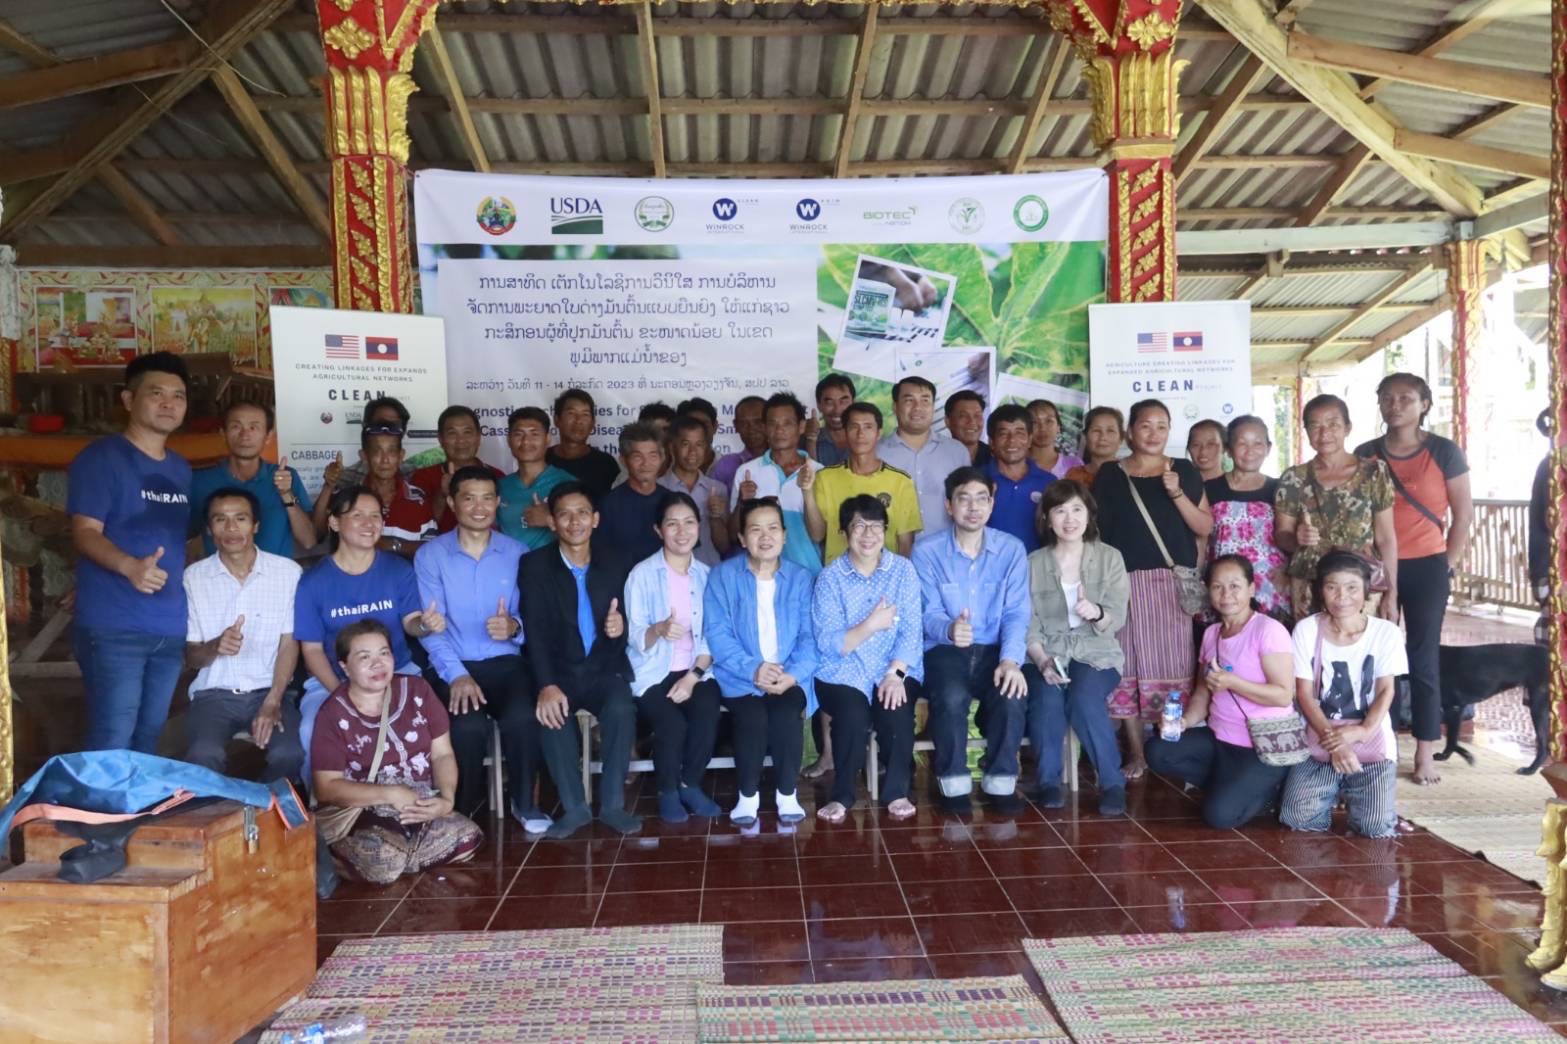 BIOTEC-NSTDA’s Knowledge Transfer With Lao Farmers and Experts to ...